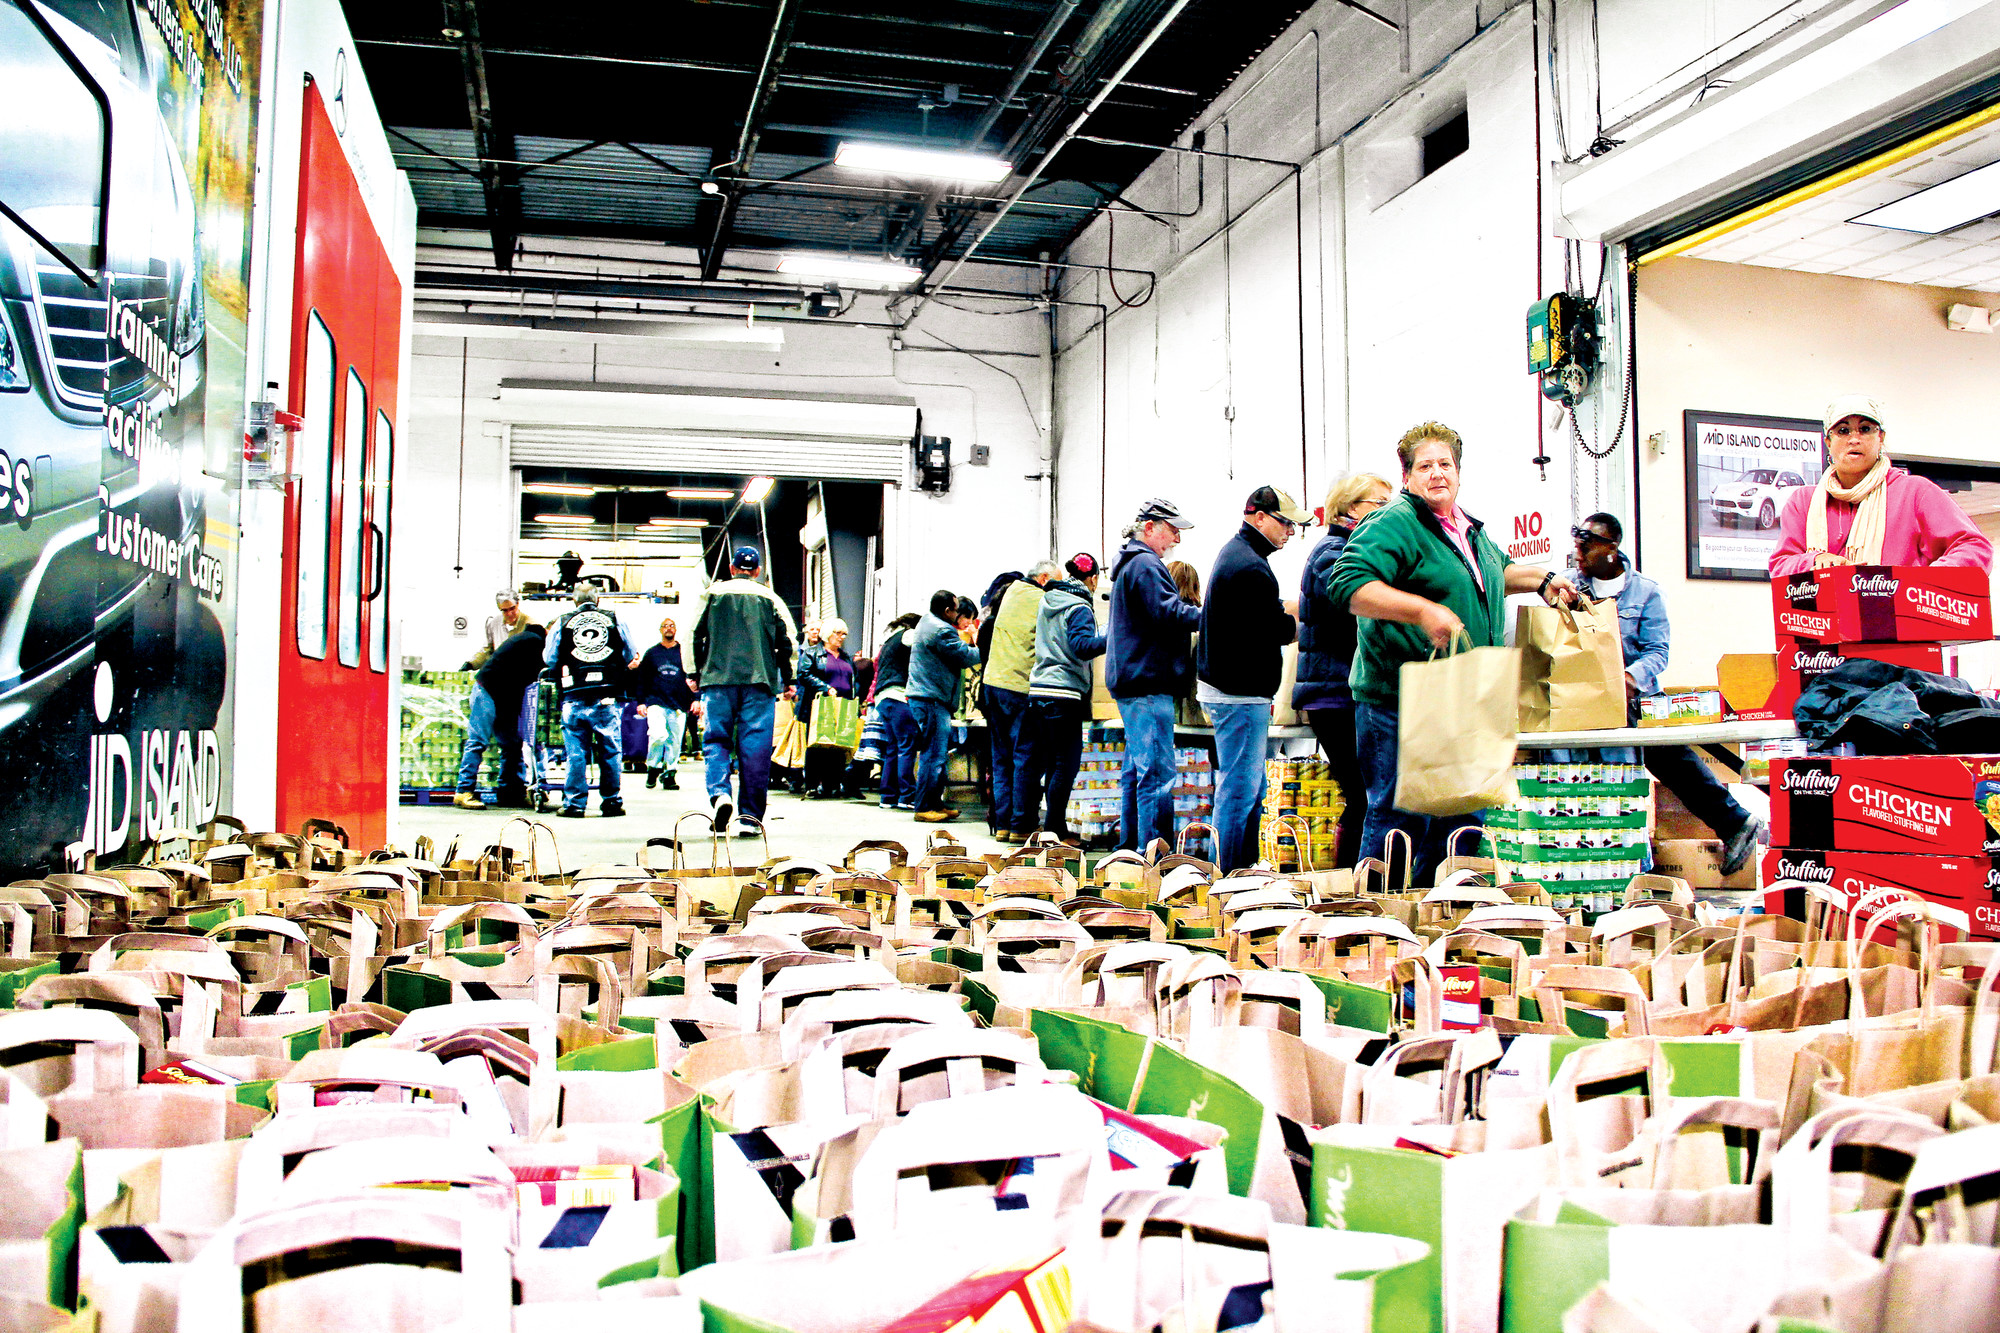 Last year, hundreds of people helped pack thousands of pounds of food at Mid-Island Collision.